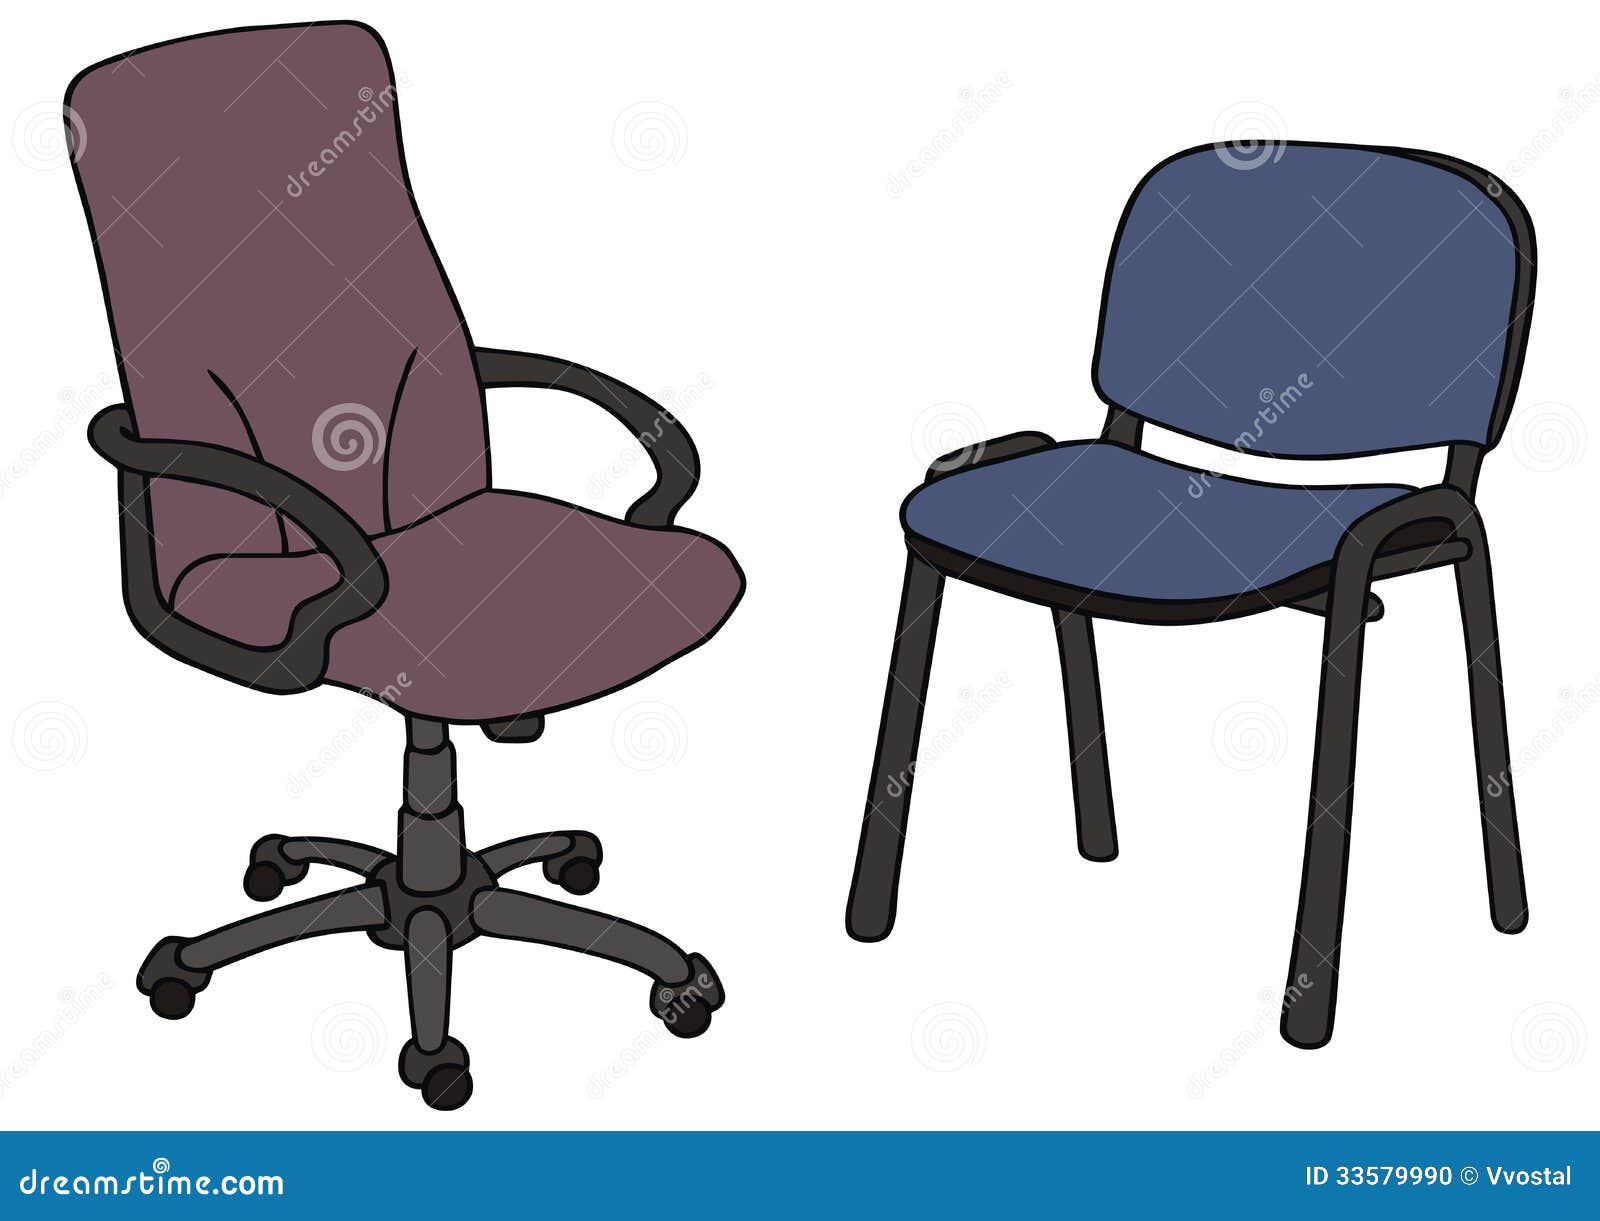 Drawing of two office chairs.